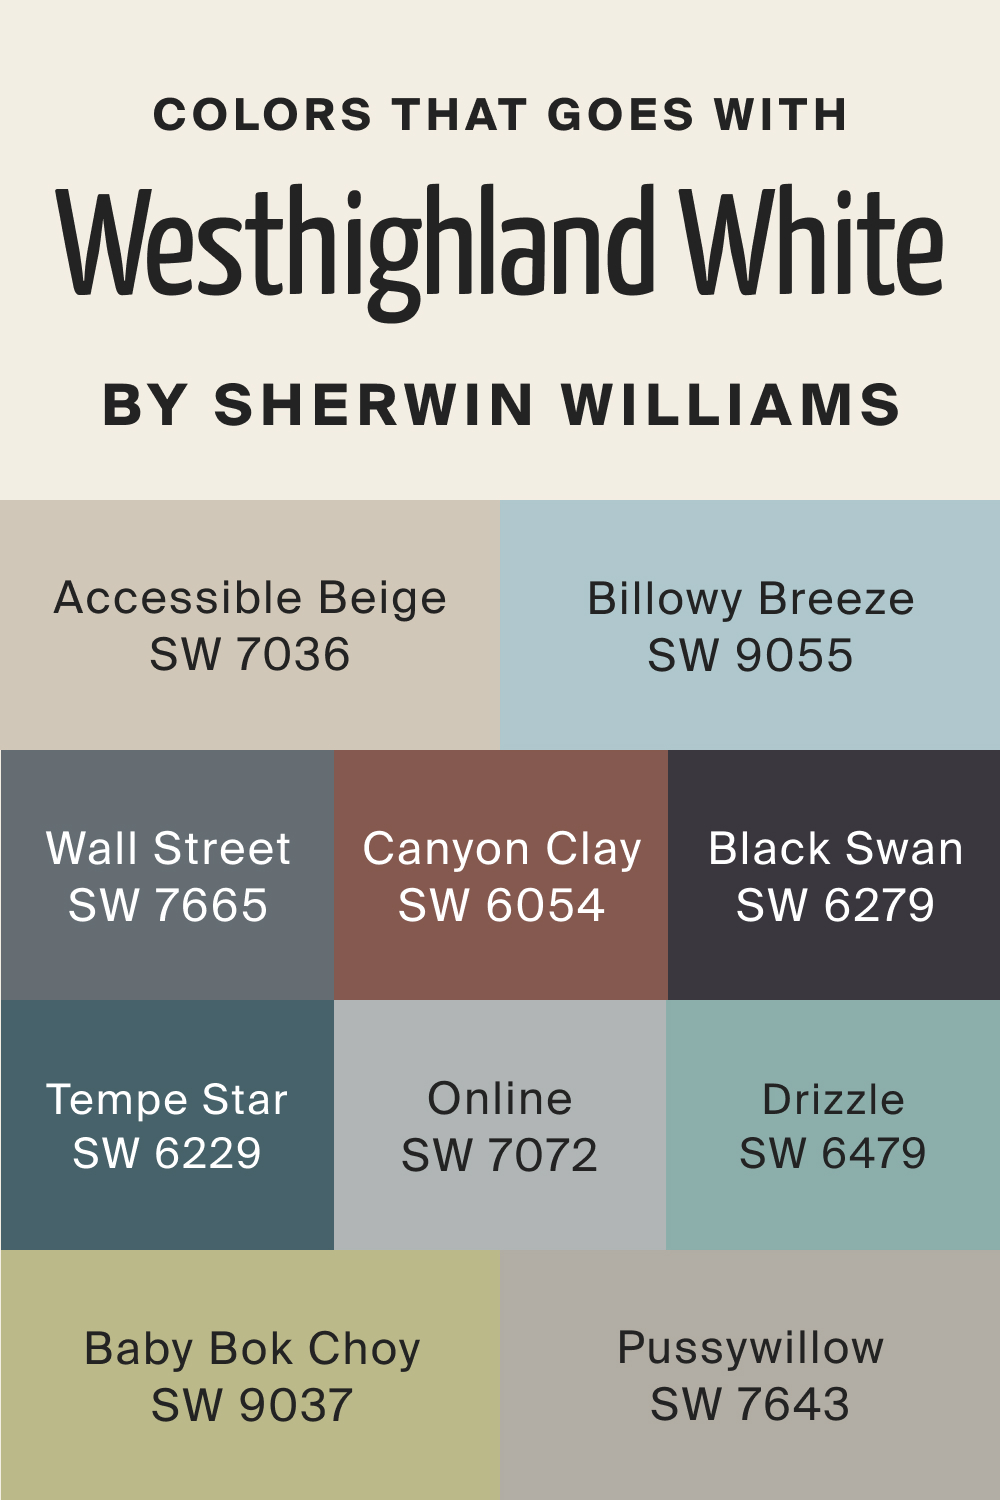 Colors that goes with Westhighland White SW 7566 by Sherwin Williams